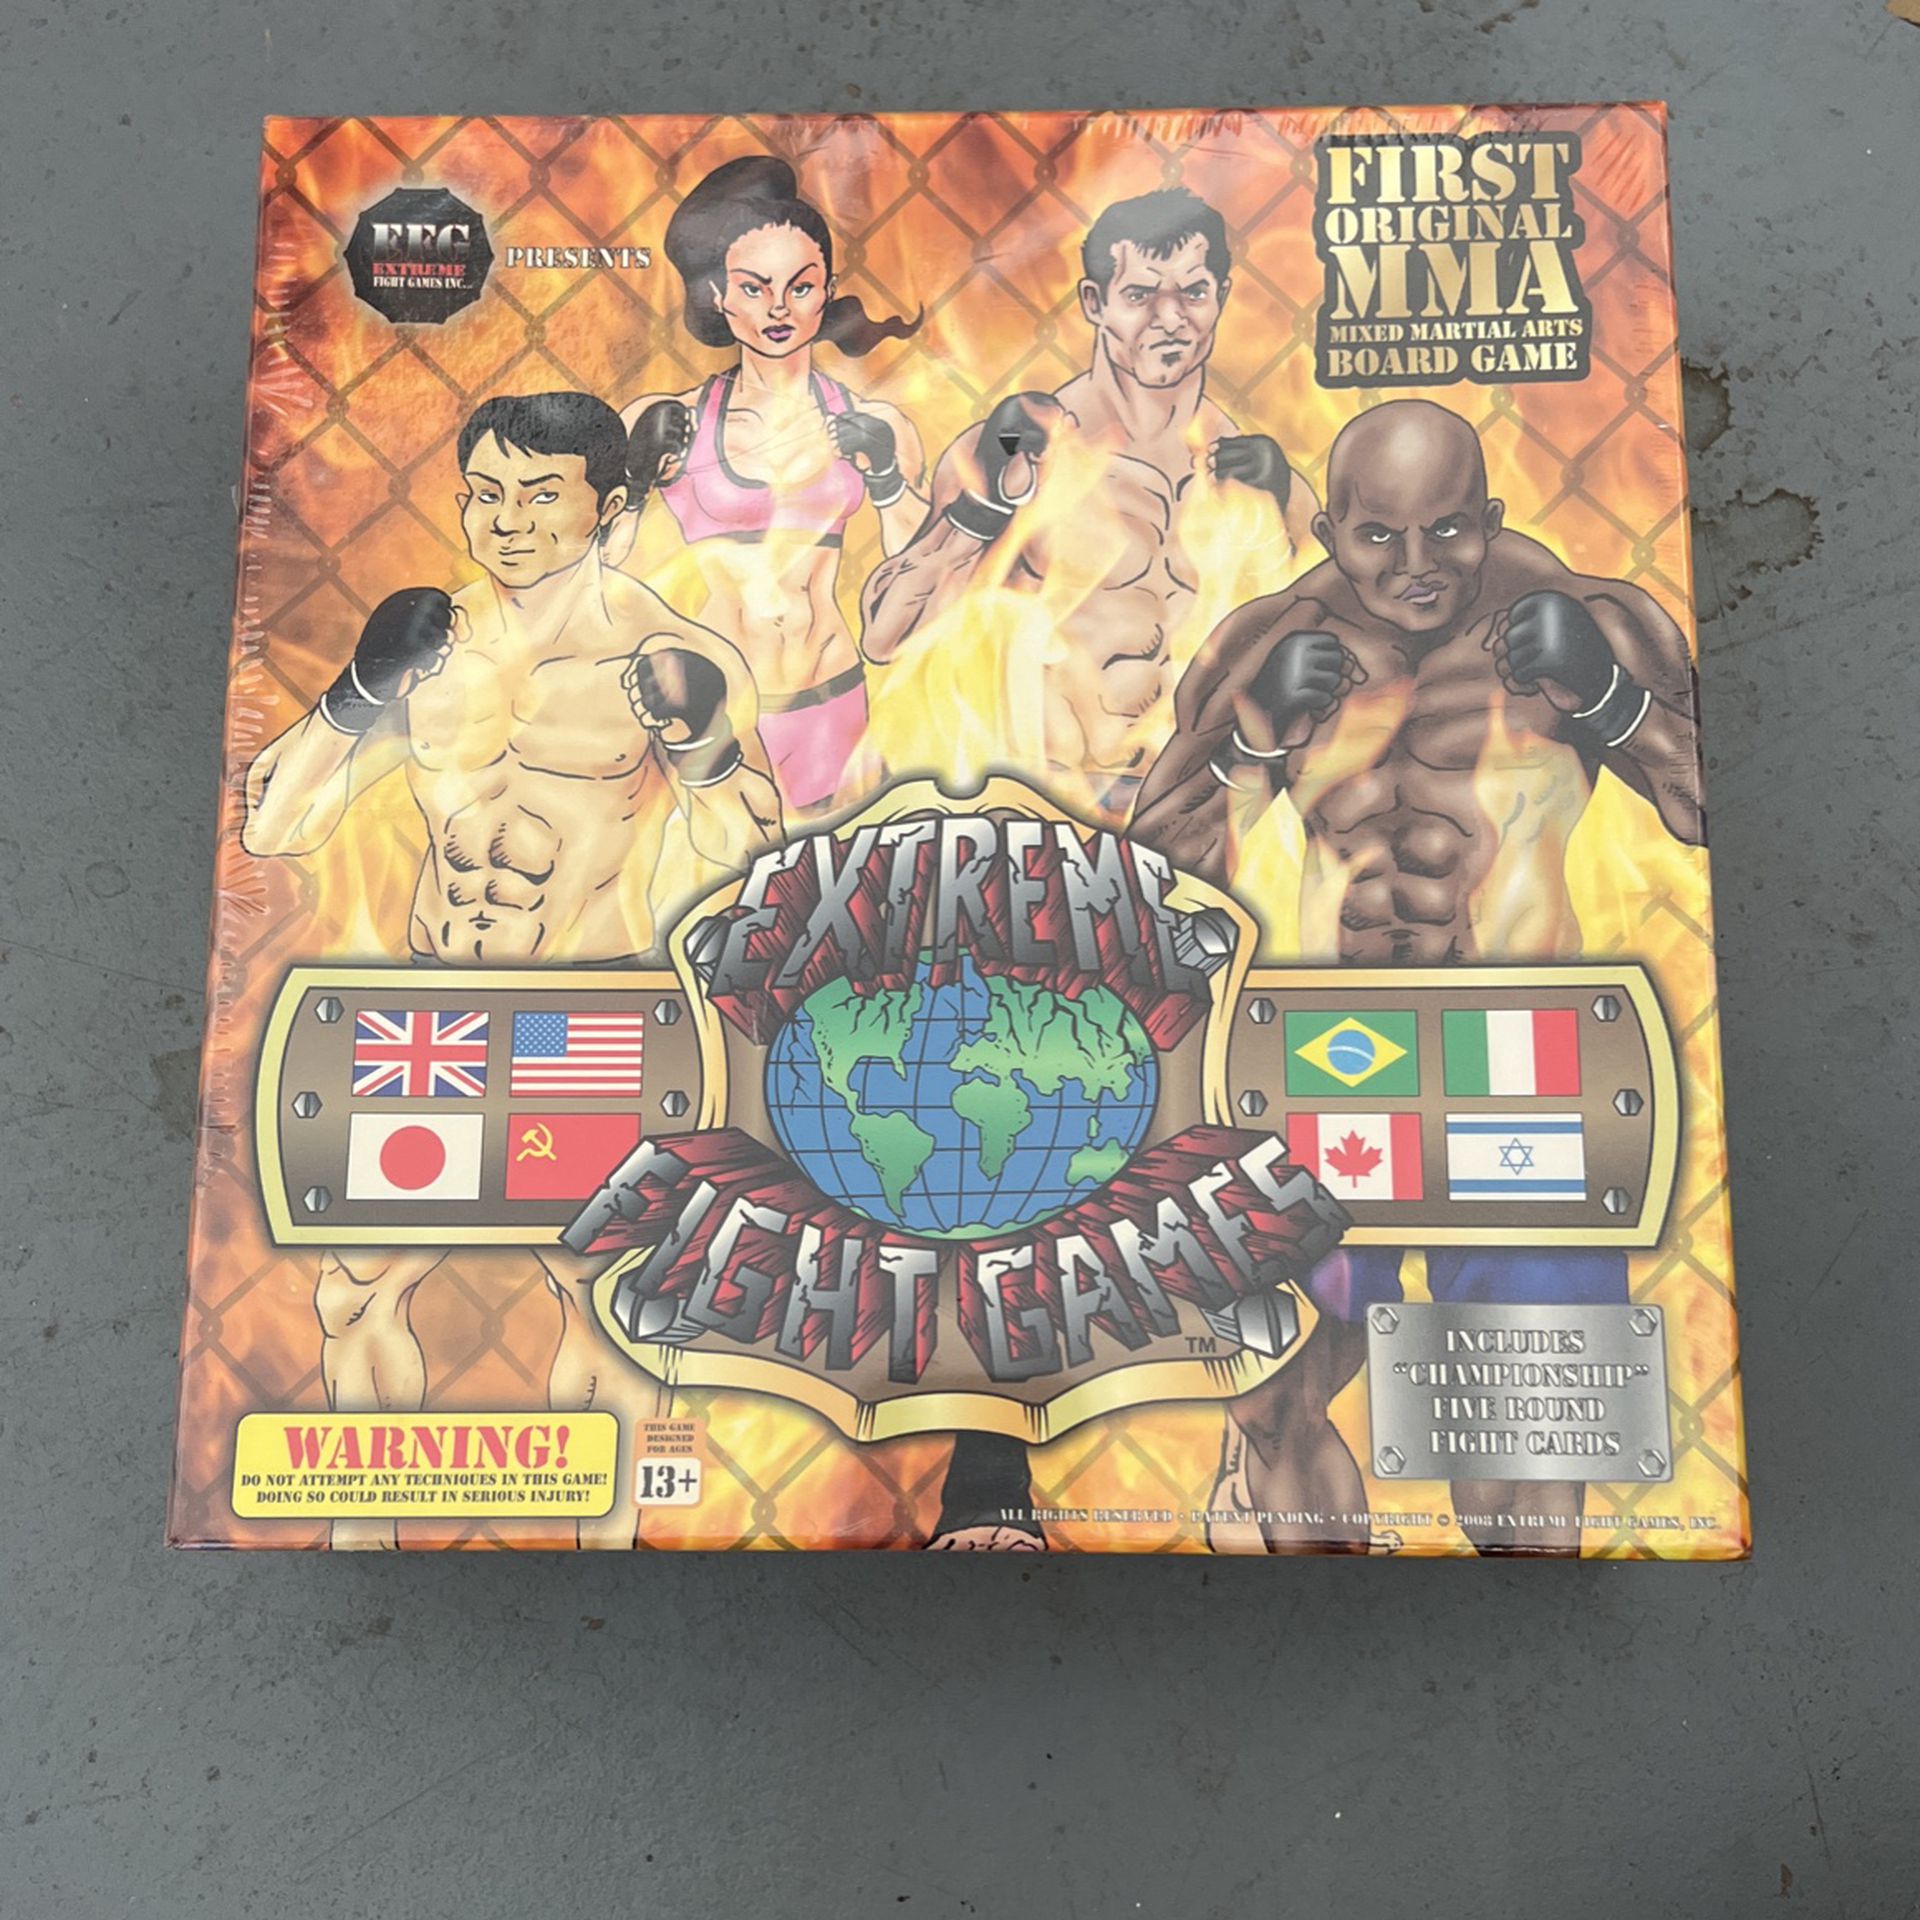 Extreme Fight Games Mixed Martial Arts Board Game